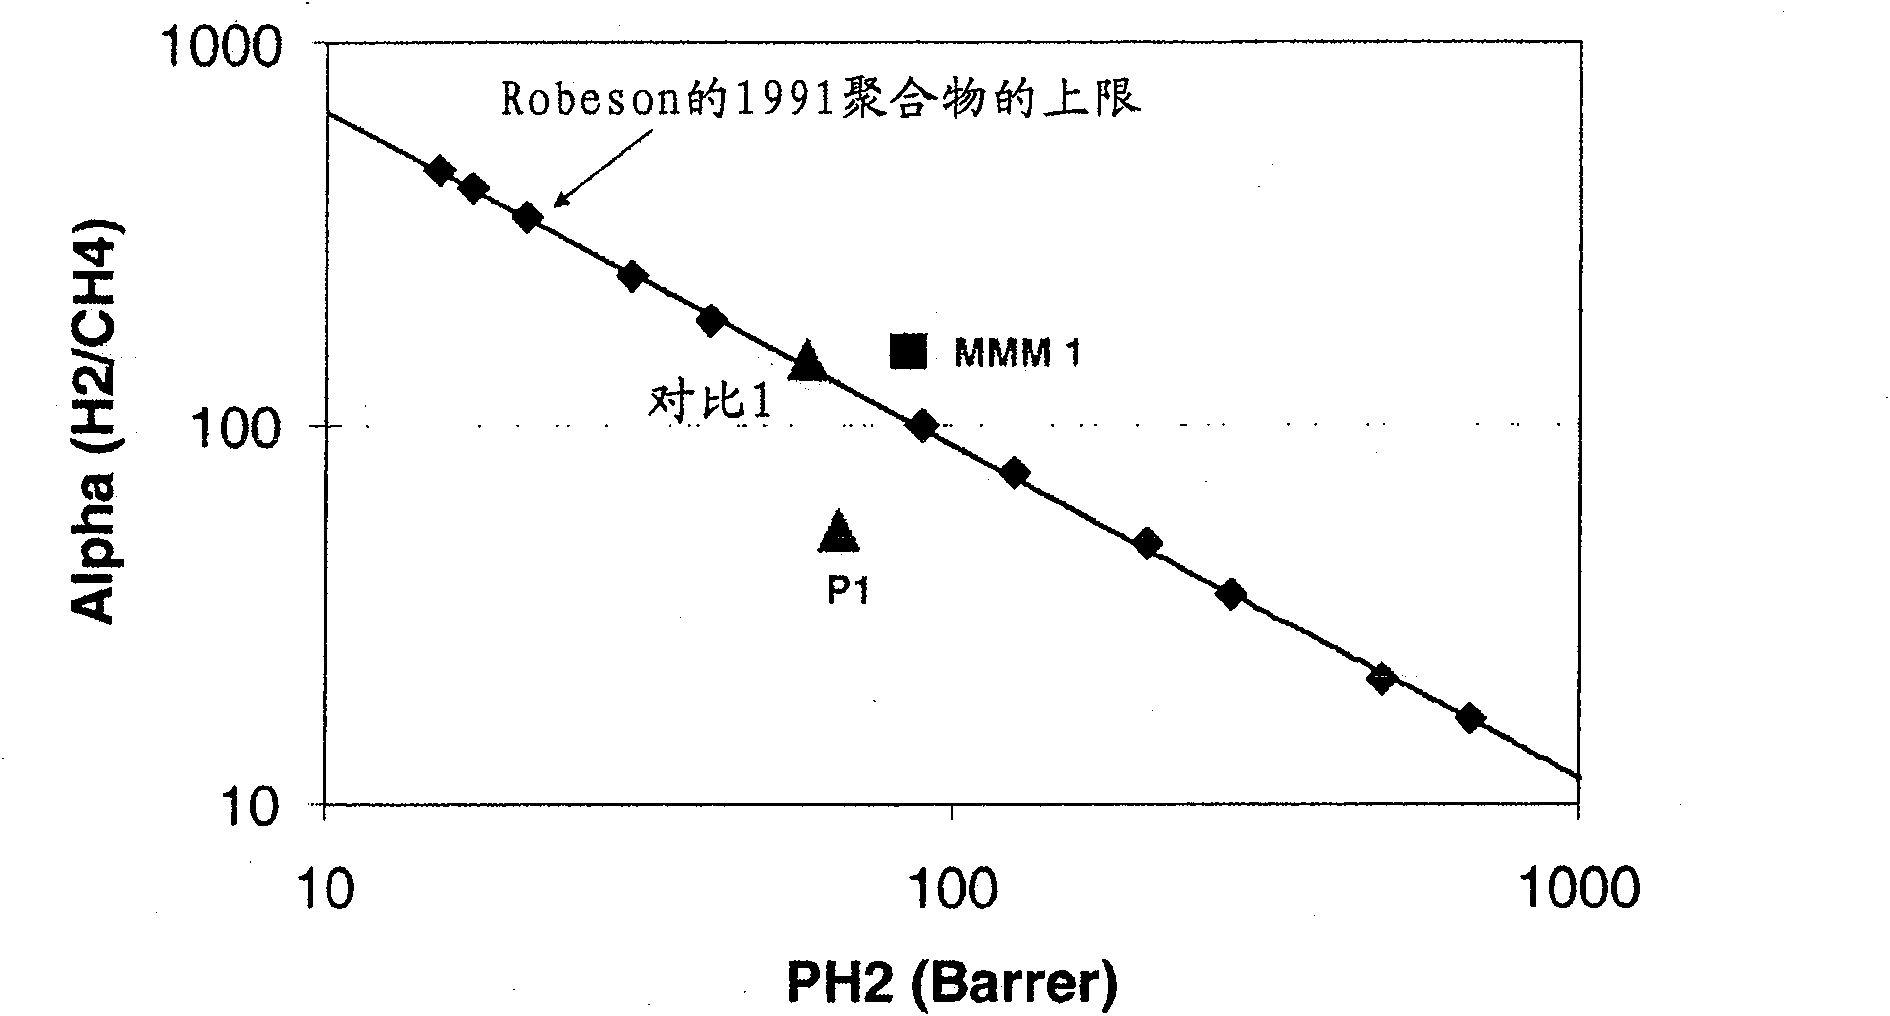 UV cross-linked polymer functionalized molecular sieve/polymer mixed matrix membranes